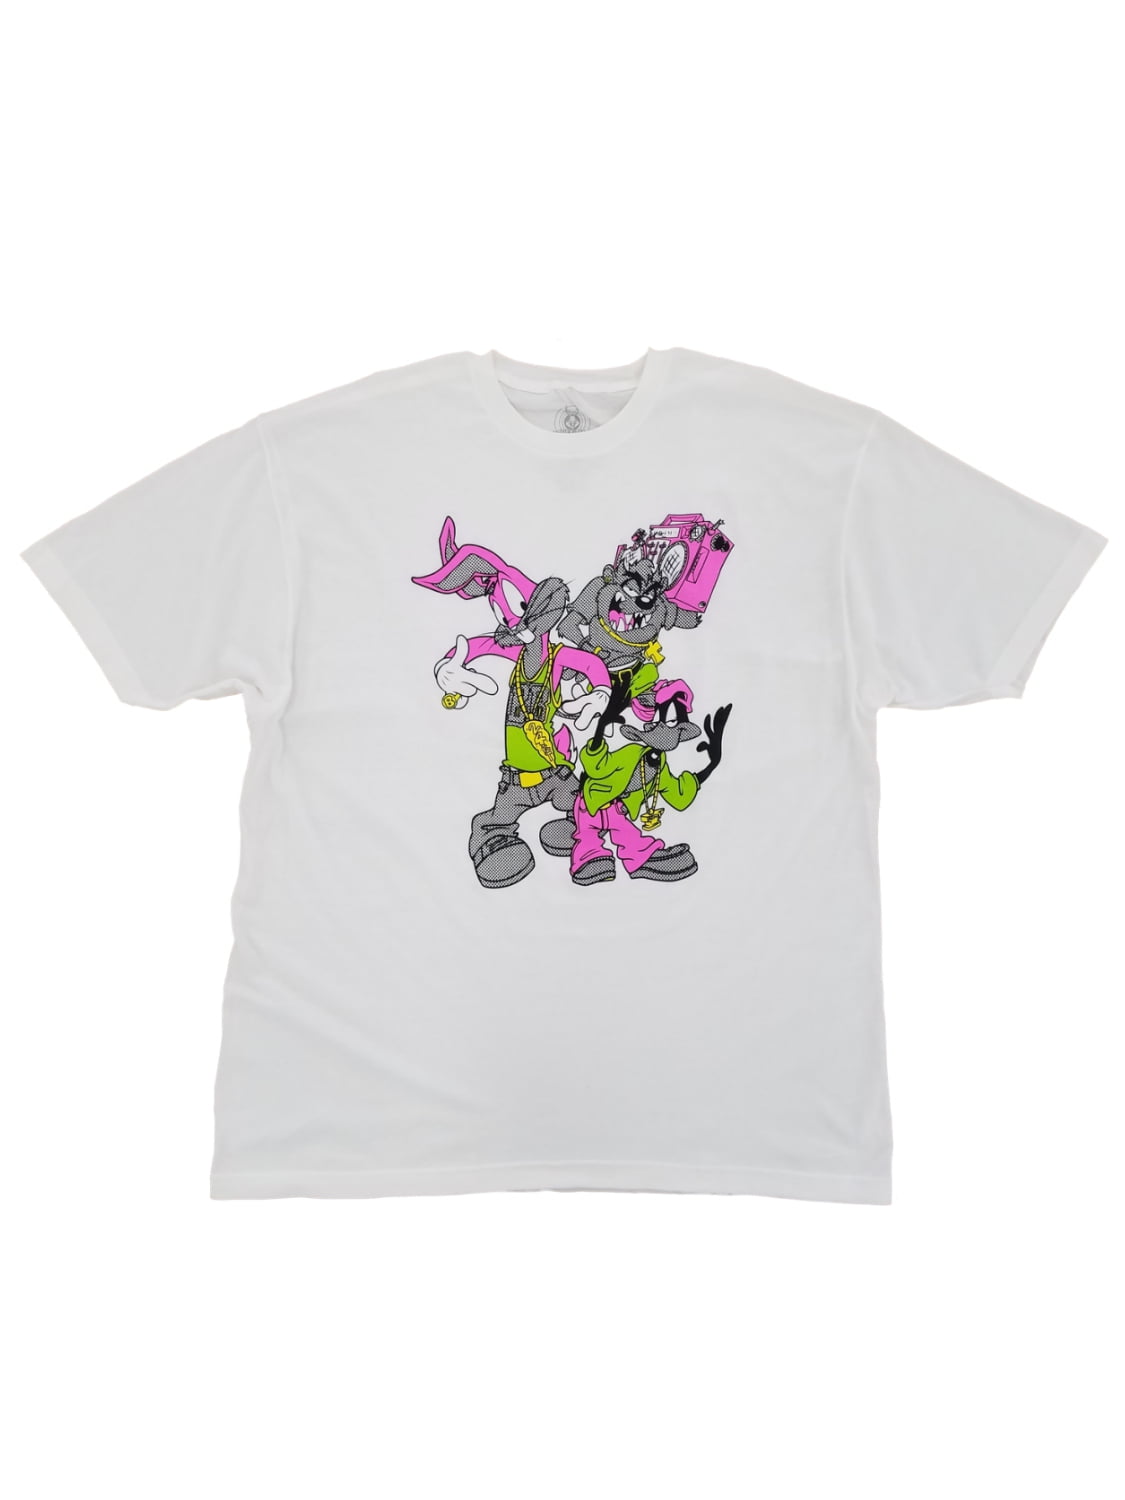 Looney Tunes Bugs Bunny Taz Daffy Duck Mens White 90's Remix Graphic T-Shirt  2XL